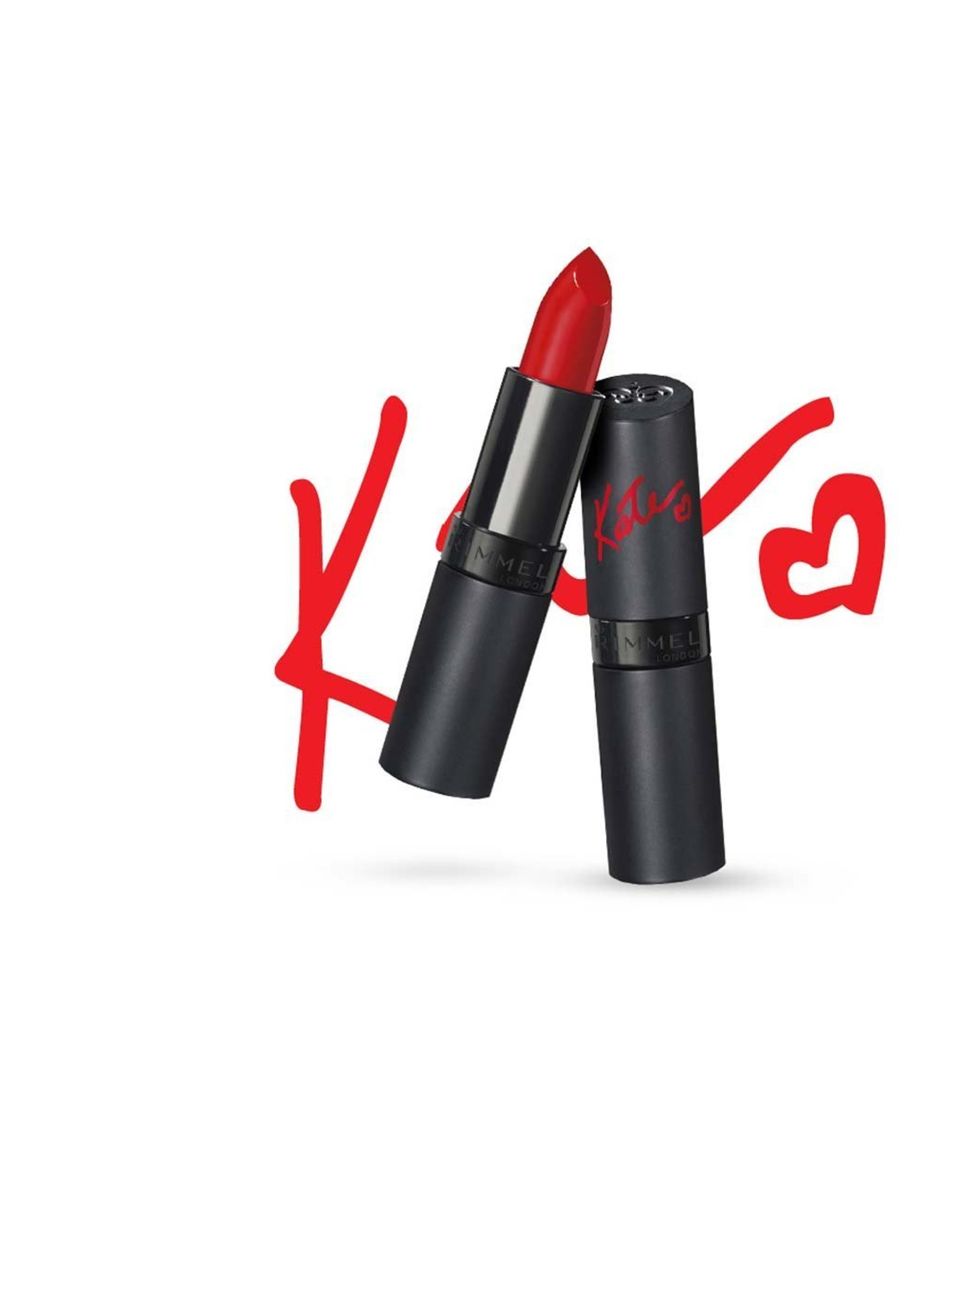 <p><a href="http://www.boots.com/en/Rimmel-Kate-Lasting-Finish-Lipstick_1230439/">Kate Moss Lasting Finish Lipstick in 22, £5.49</a></p><p>There is NOTHING like a bright smile to lift a mood. Particularly one that is classic red, Kate Moss approved and ge